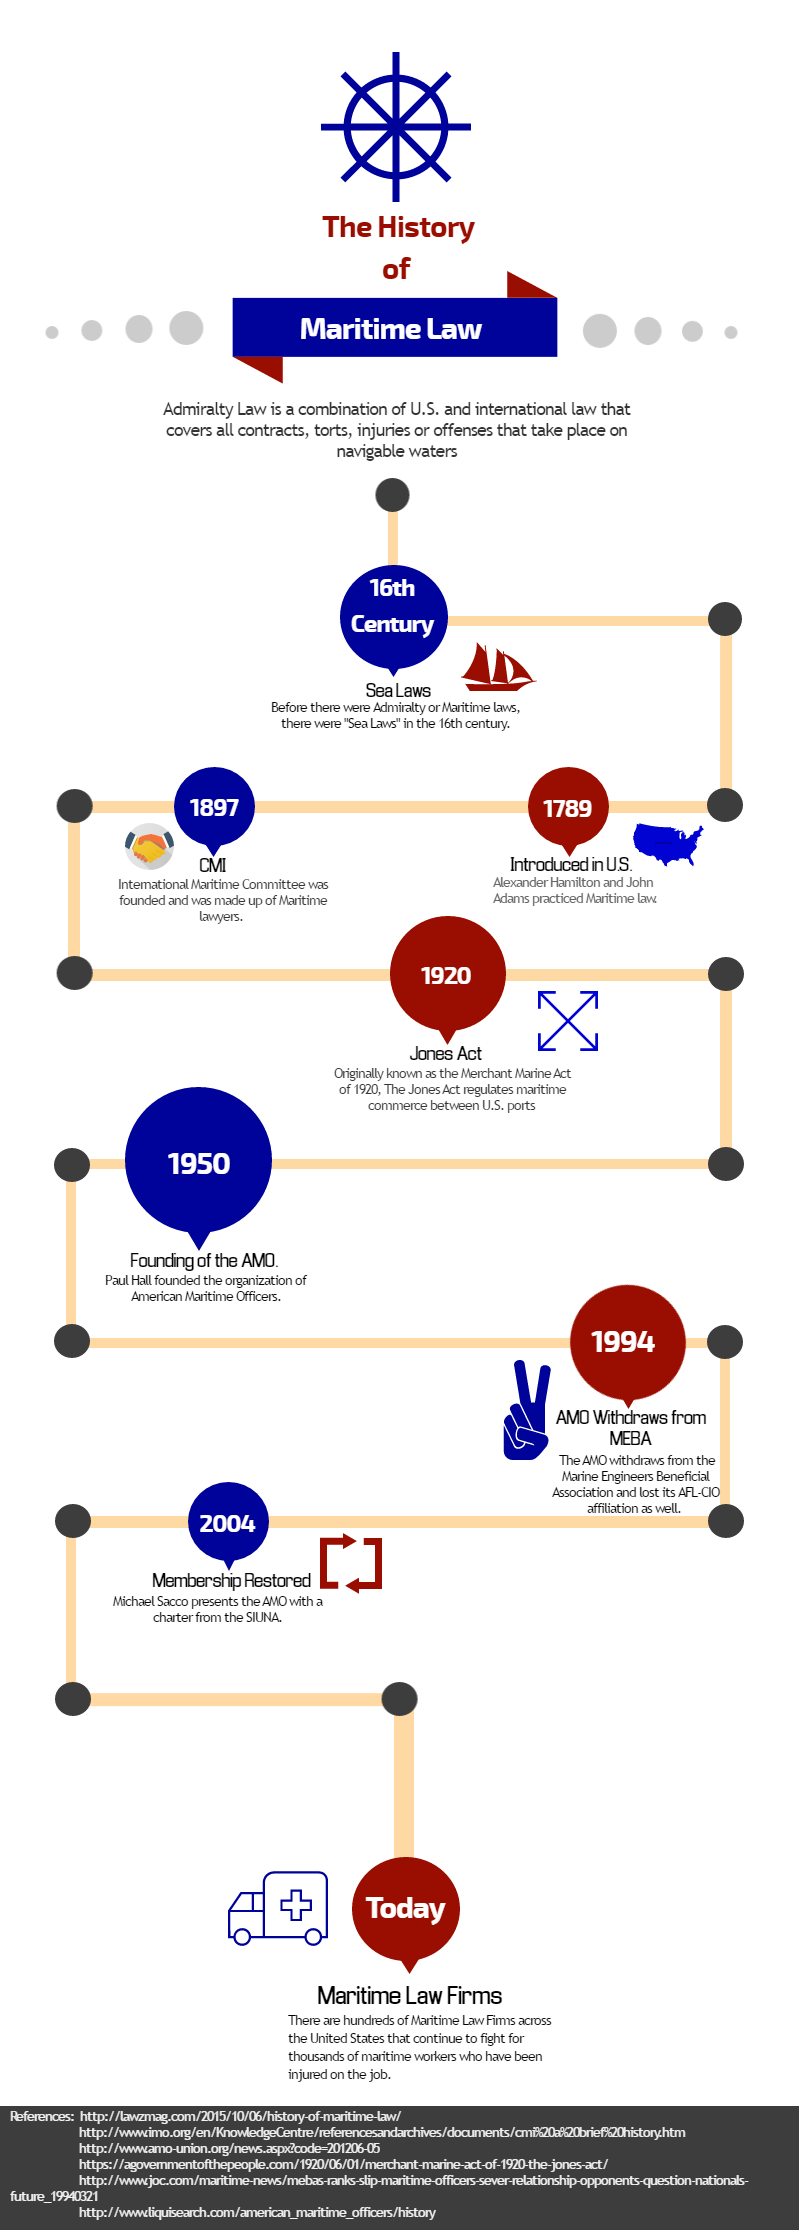 Infographic describing the history of maritime law and the Jones Act created by O'Bryan Law